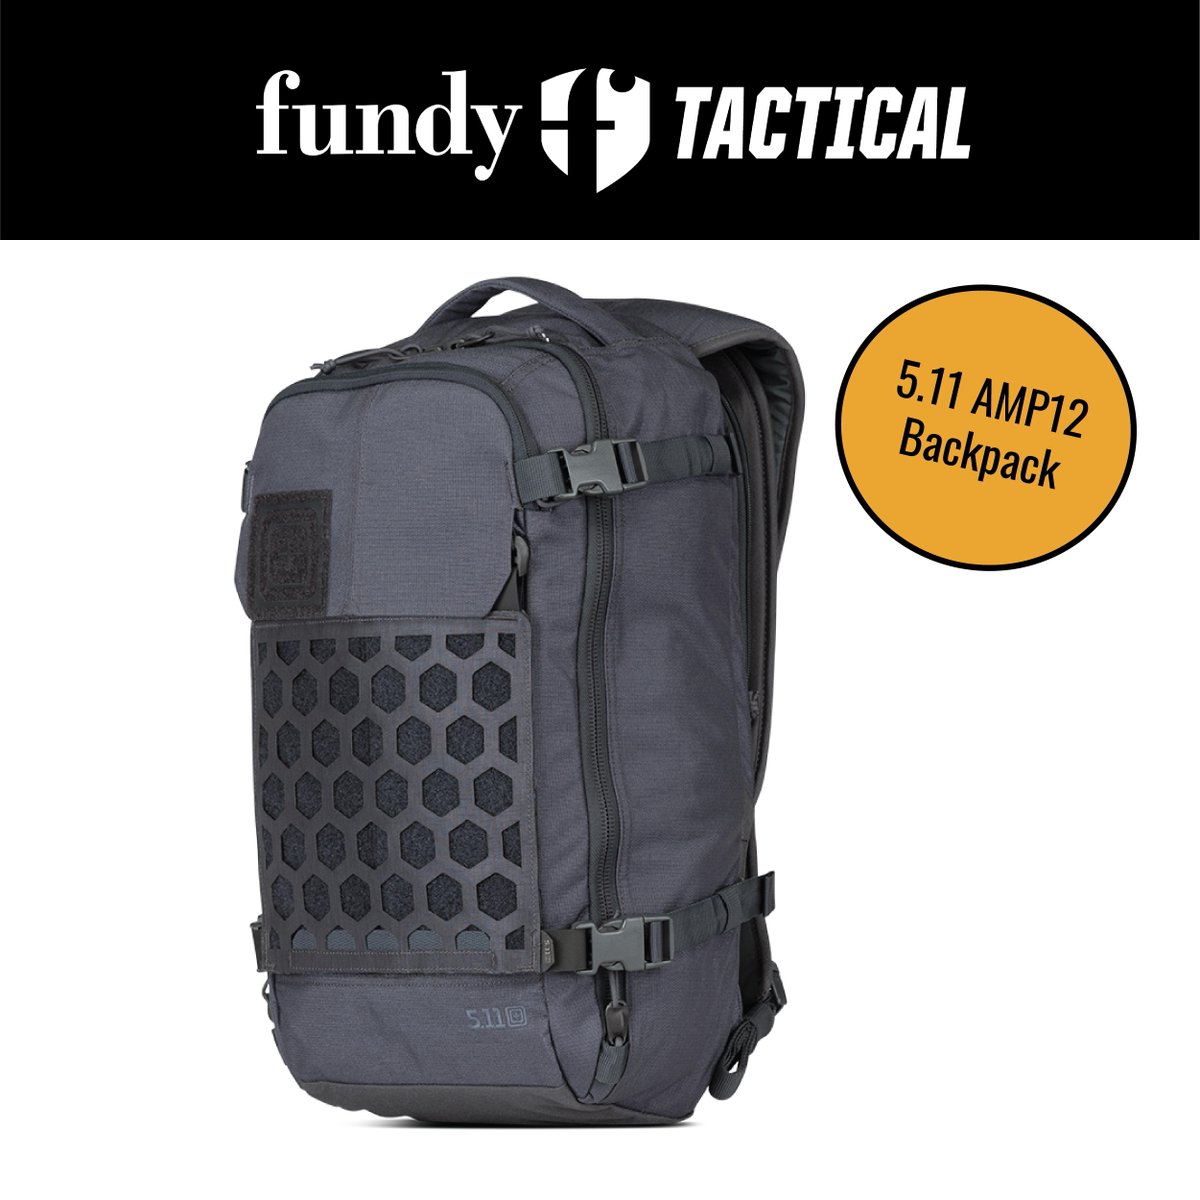 Staff pick of the week: Jason chose the 5.11 AMP12 Backpack for... 1. Its lightweight yet capable platform 2. The available gear-sets makes for a very versatile multi-platform system 3. The sleek and sharp appearance #StaffPickoftheWeek #GearUp #511Canada